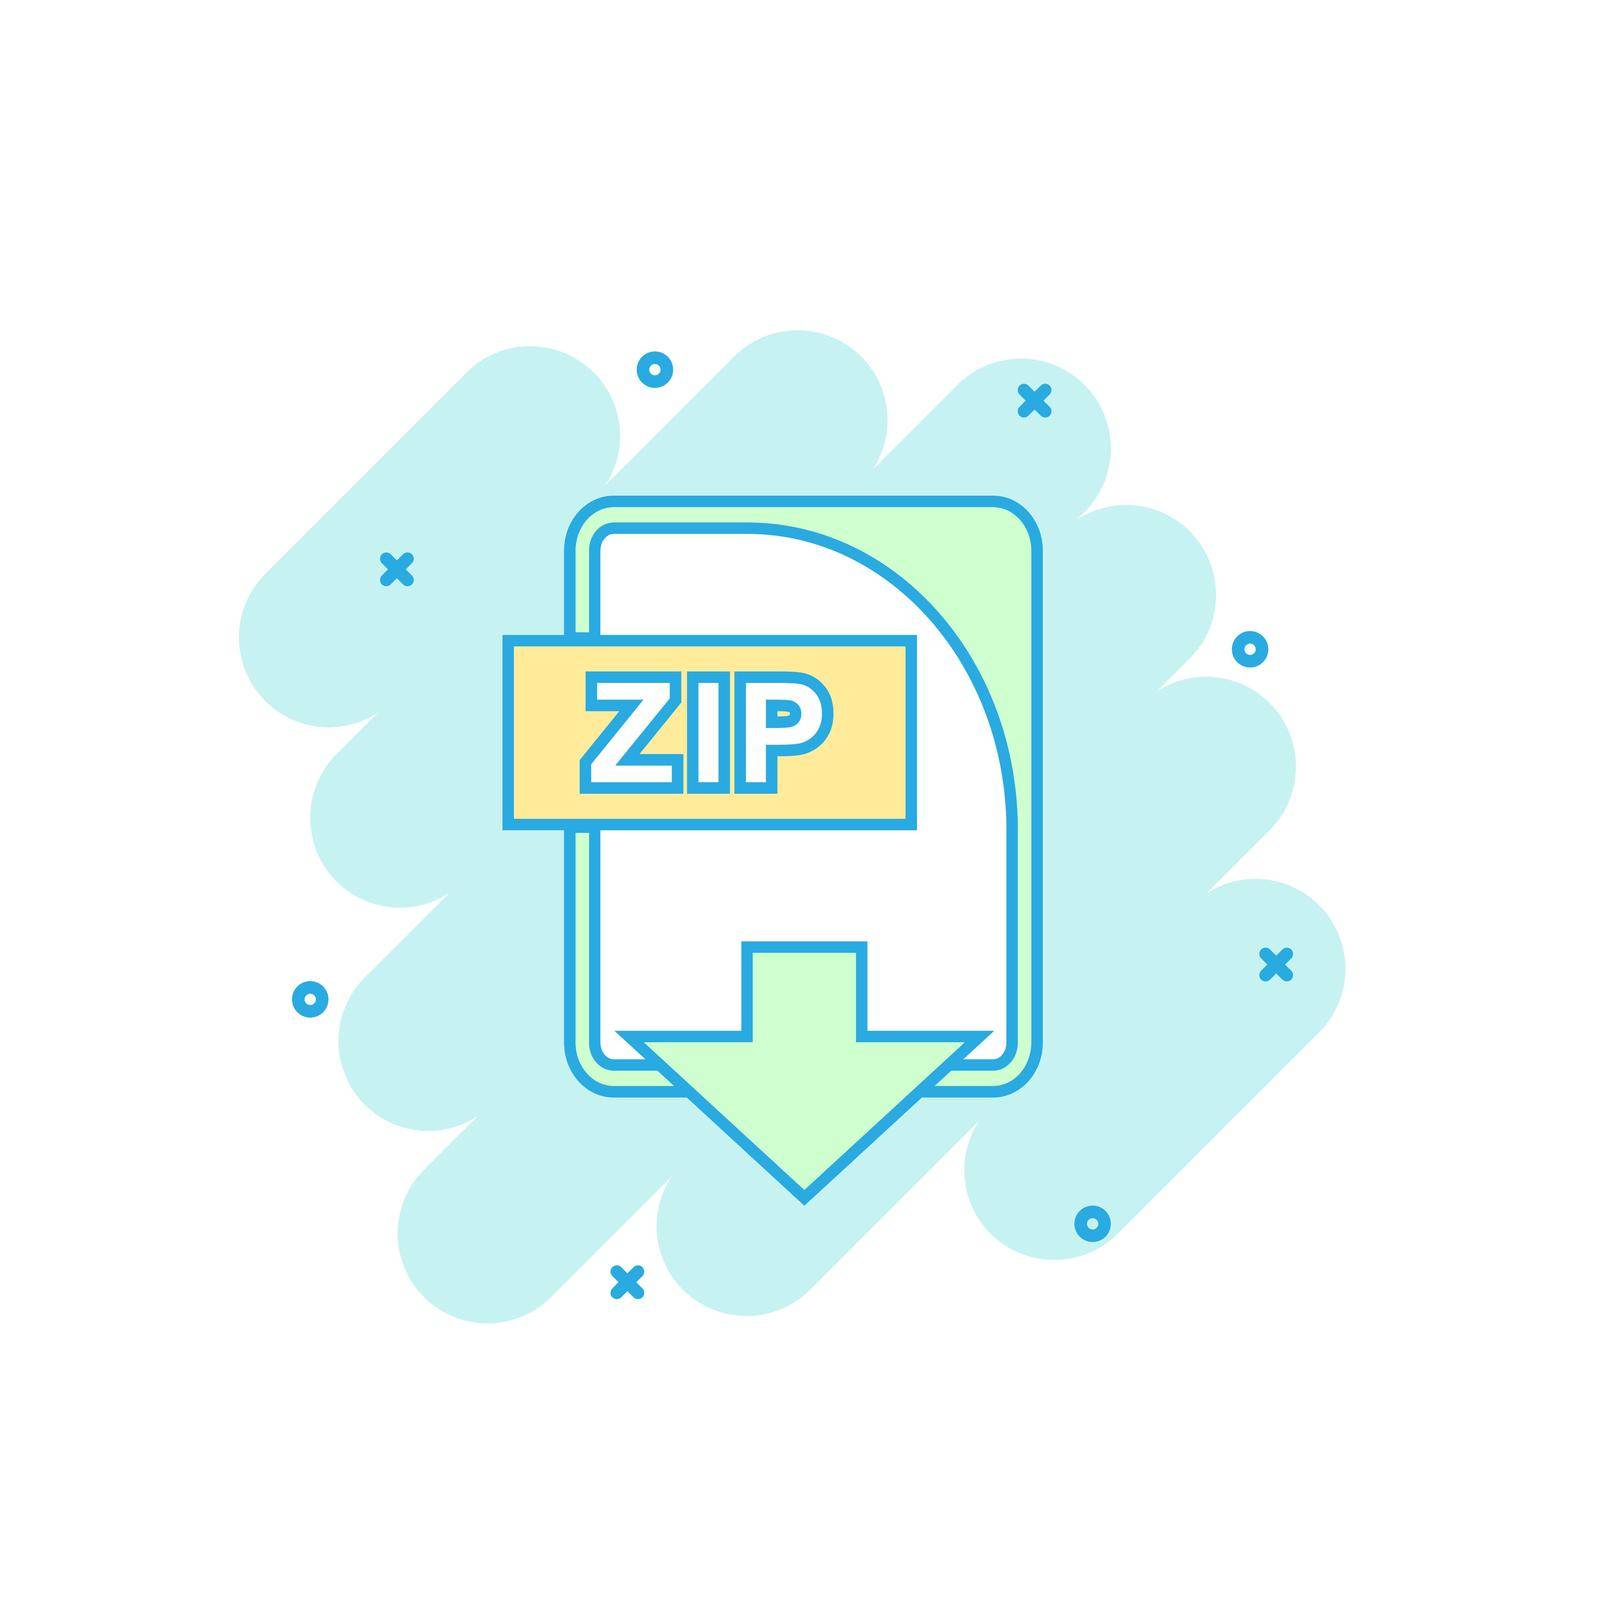 Cartoon colored ZIP file icon in comic style. Zip download illustration pictogram. Document splash business concept.